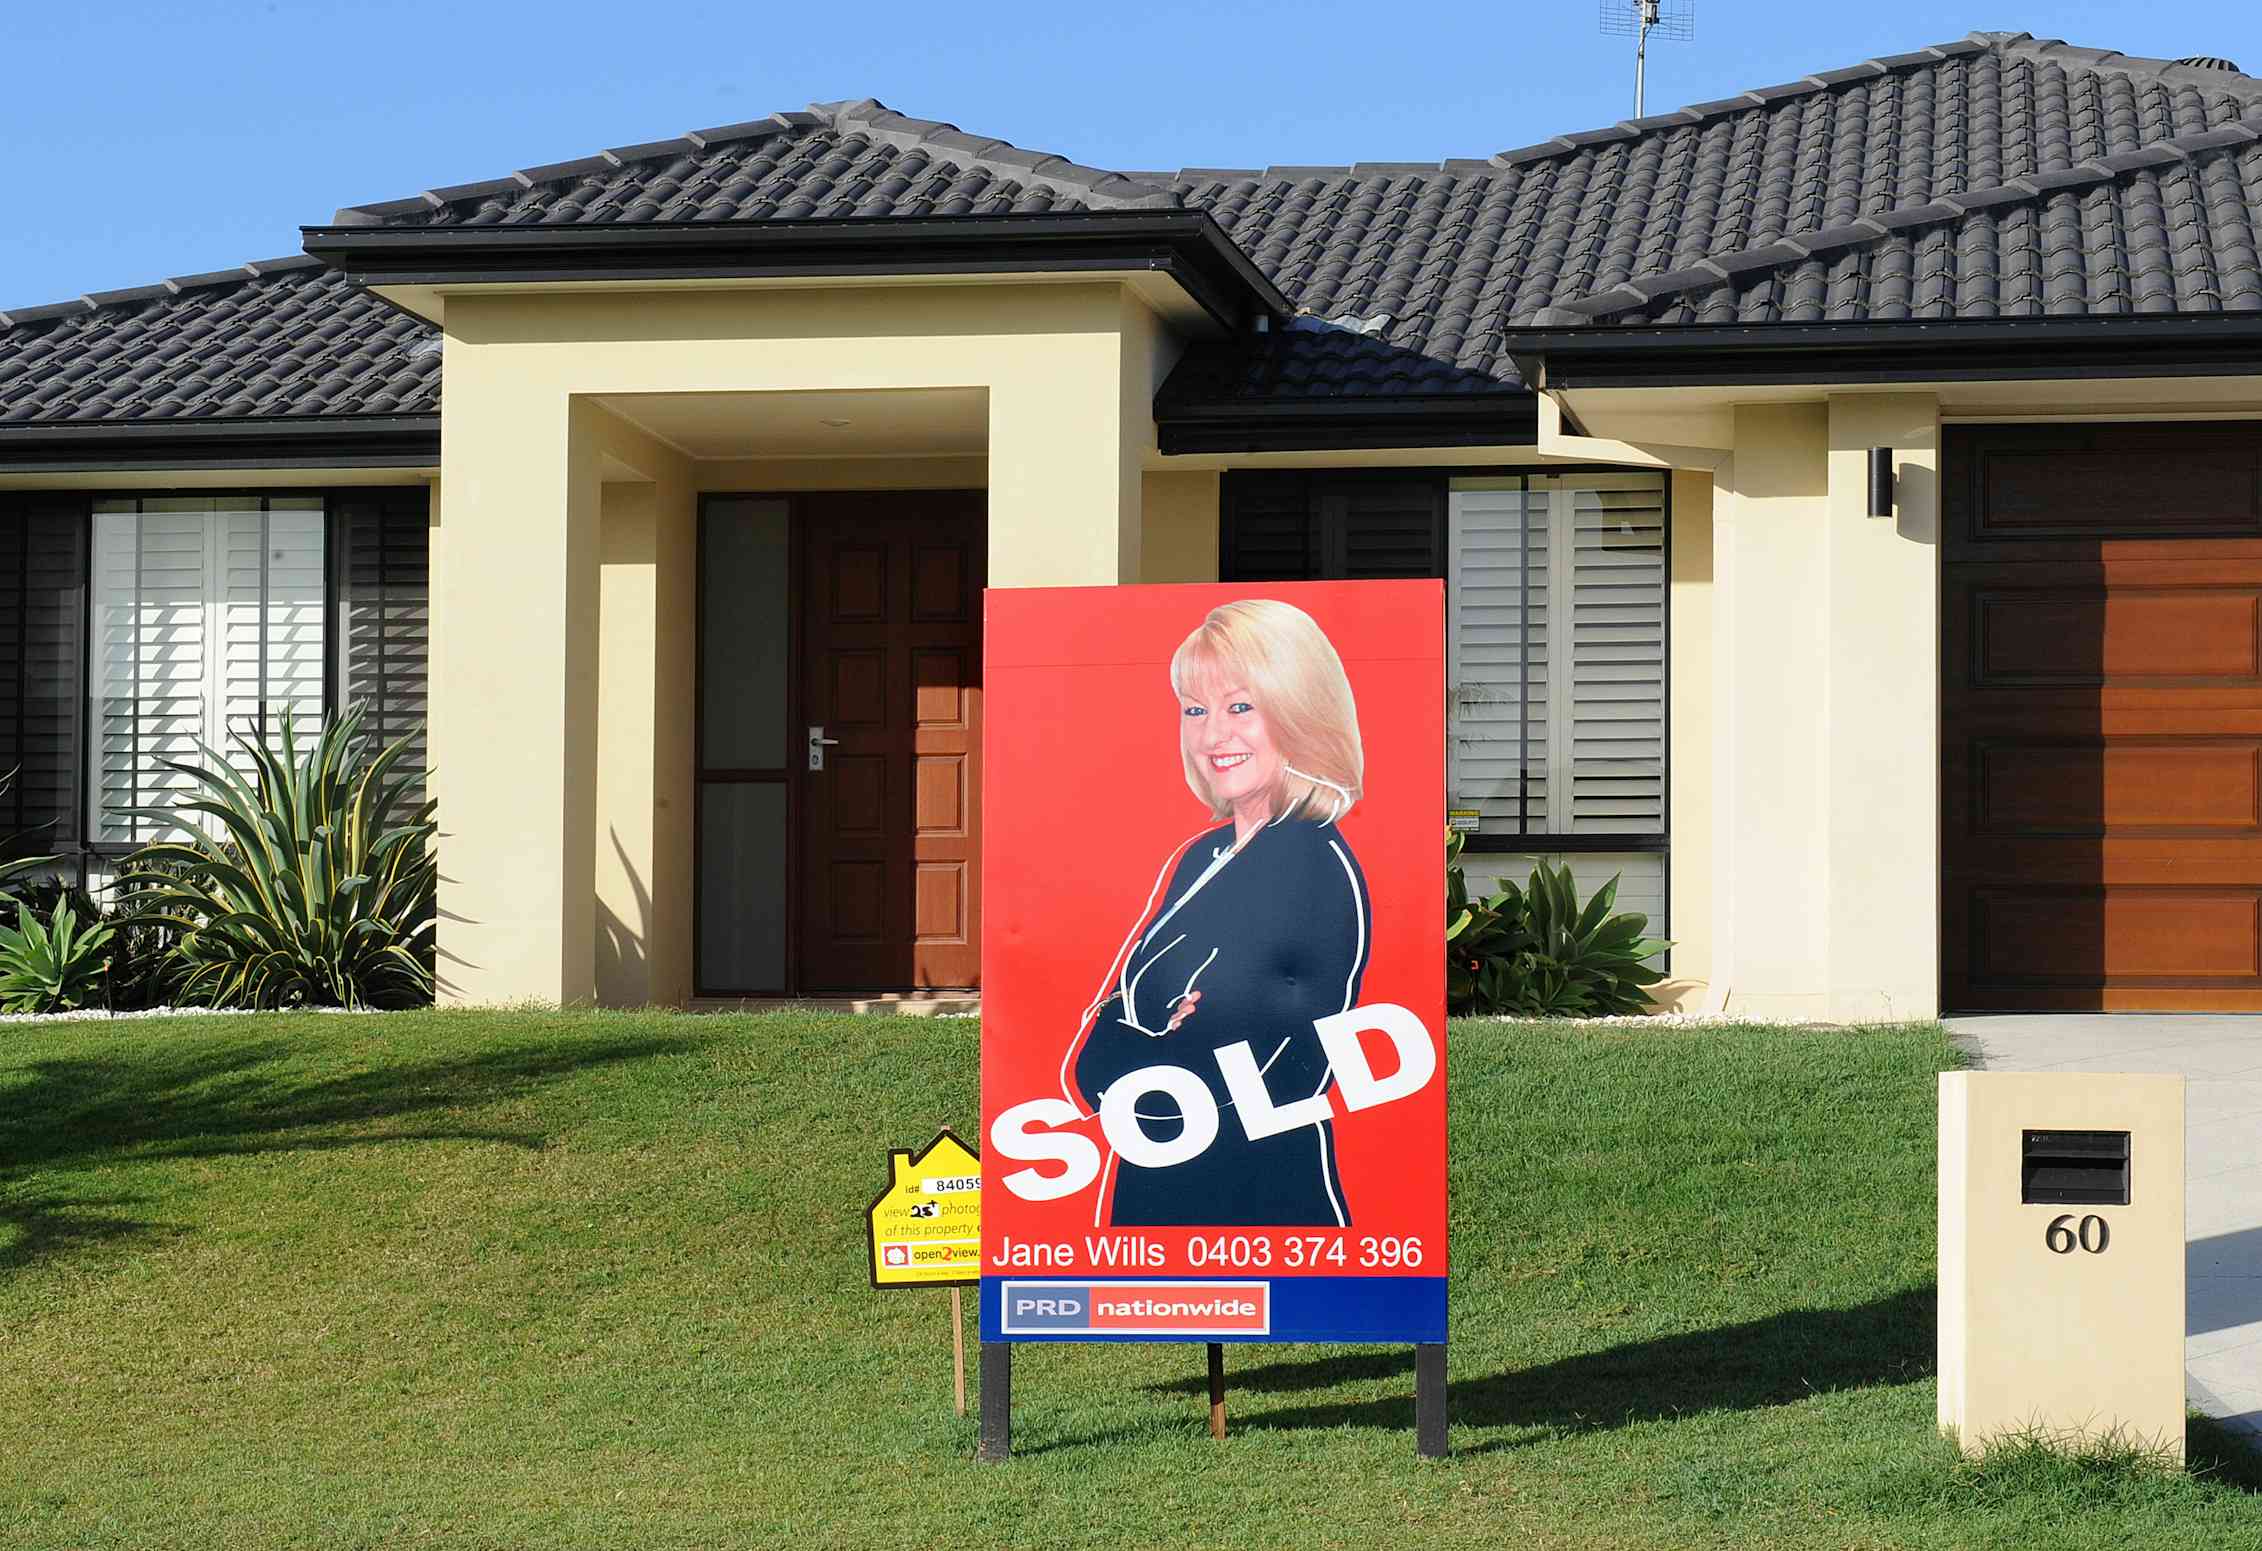 house with front lawn and sold sign depicting blonde woman